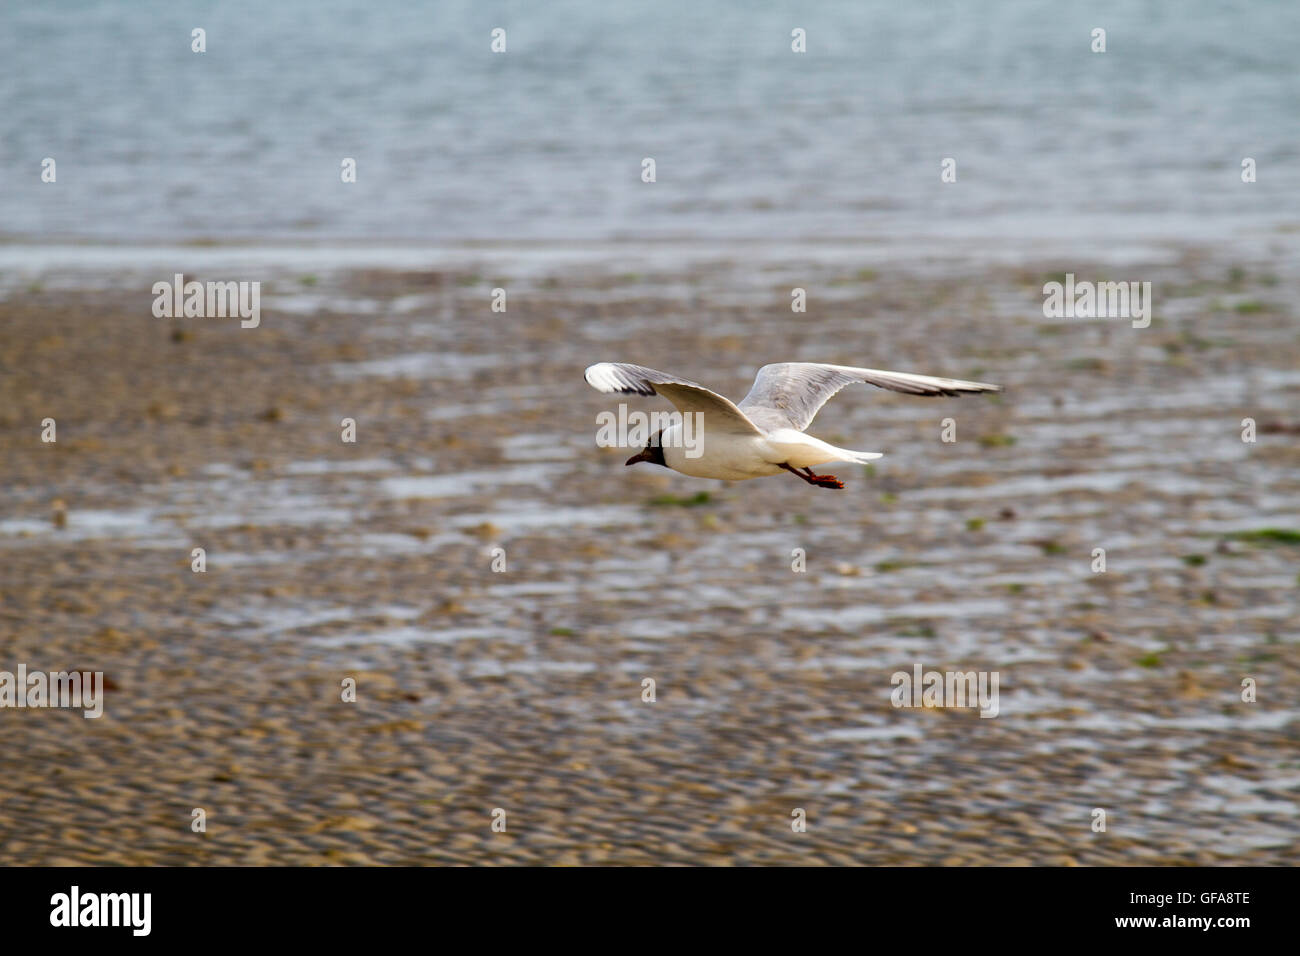 Flying One seagull isolated on the beach background. Stock Photo